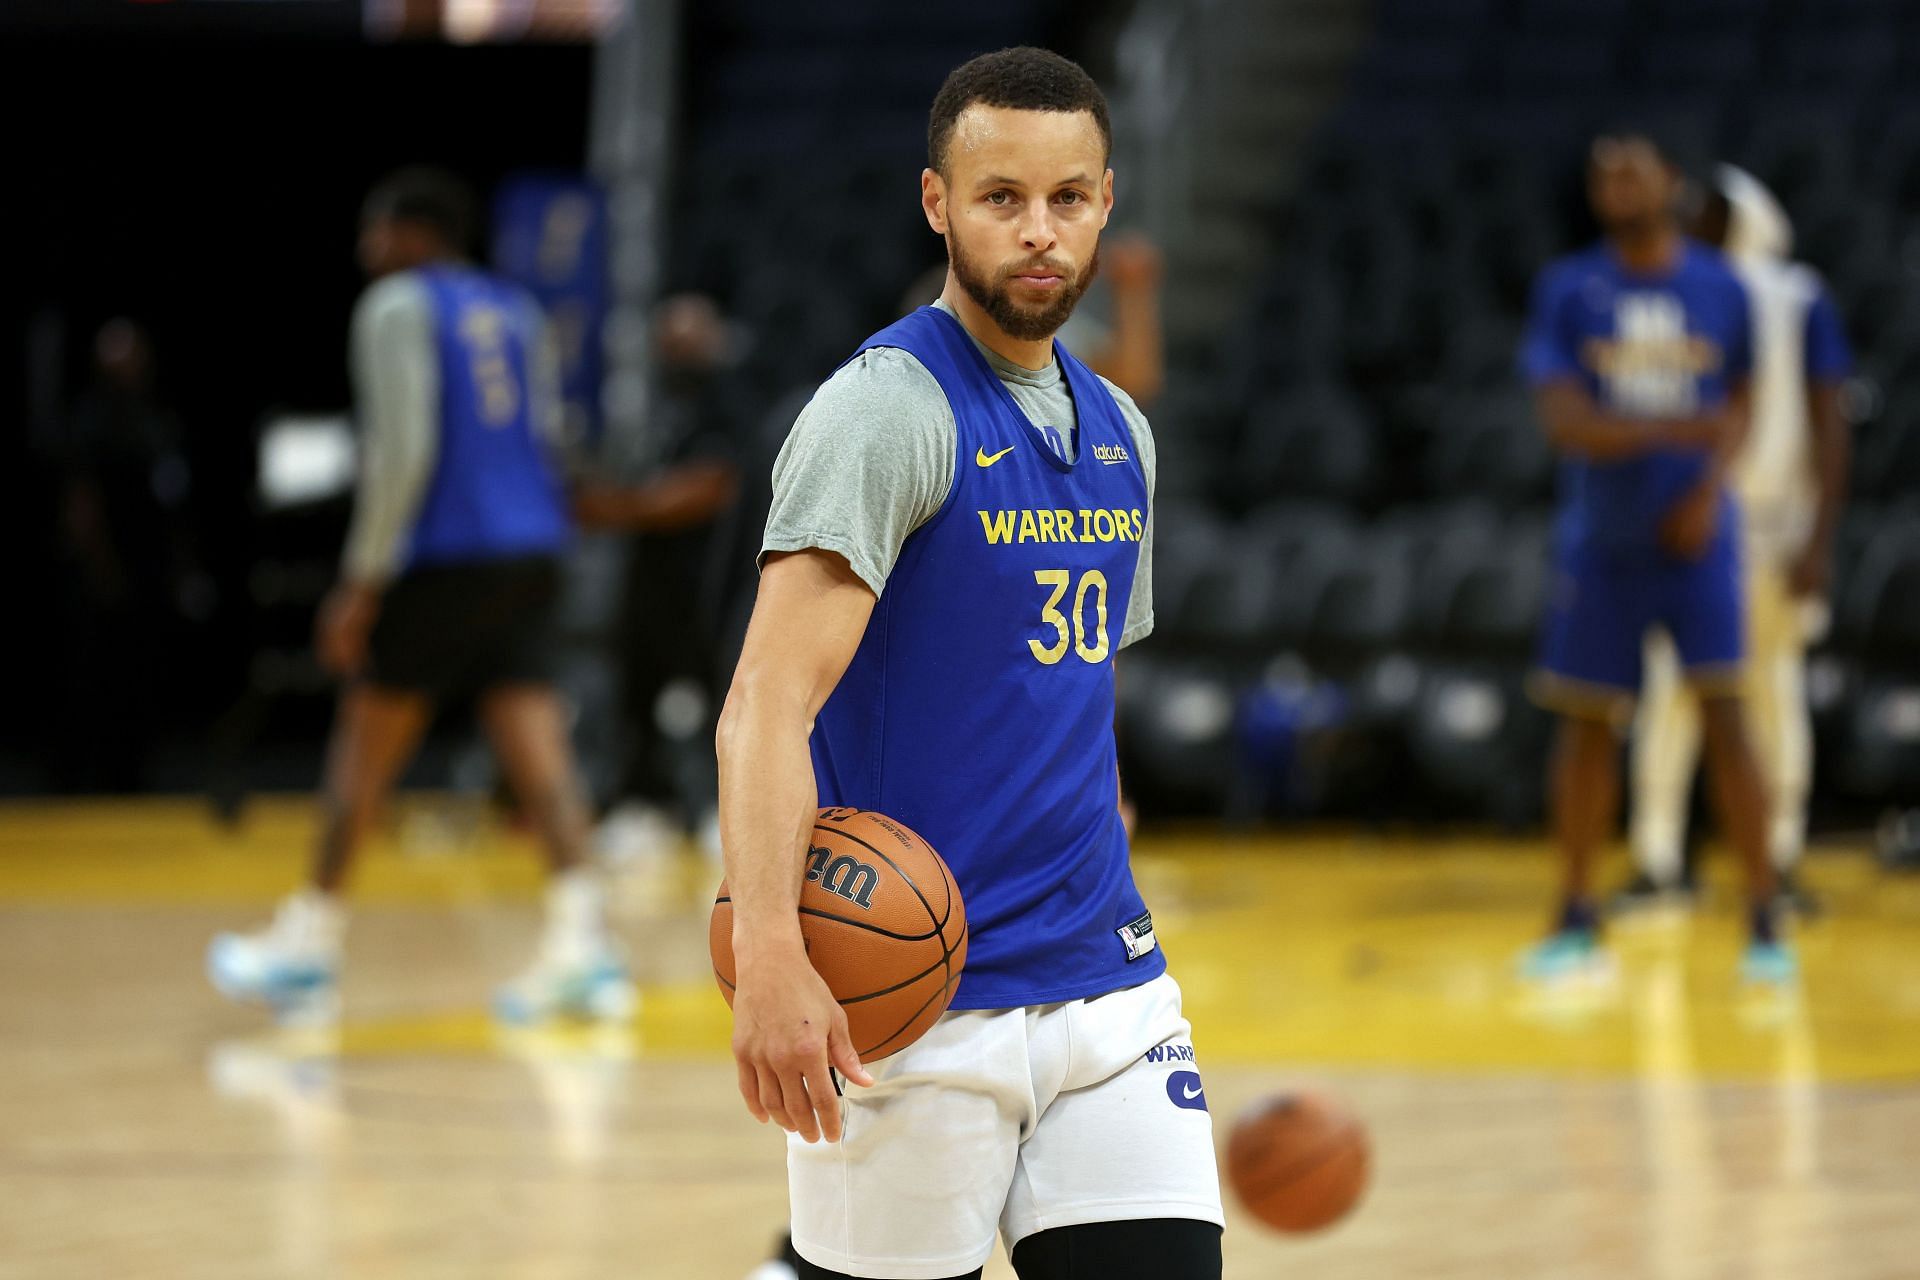 Steph Curry of the Golden State Warriors at the 2022 NBA Finals - Media Day